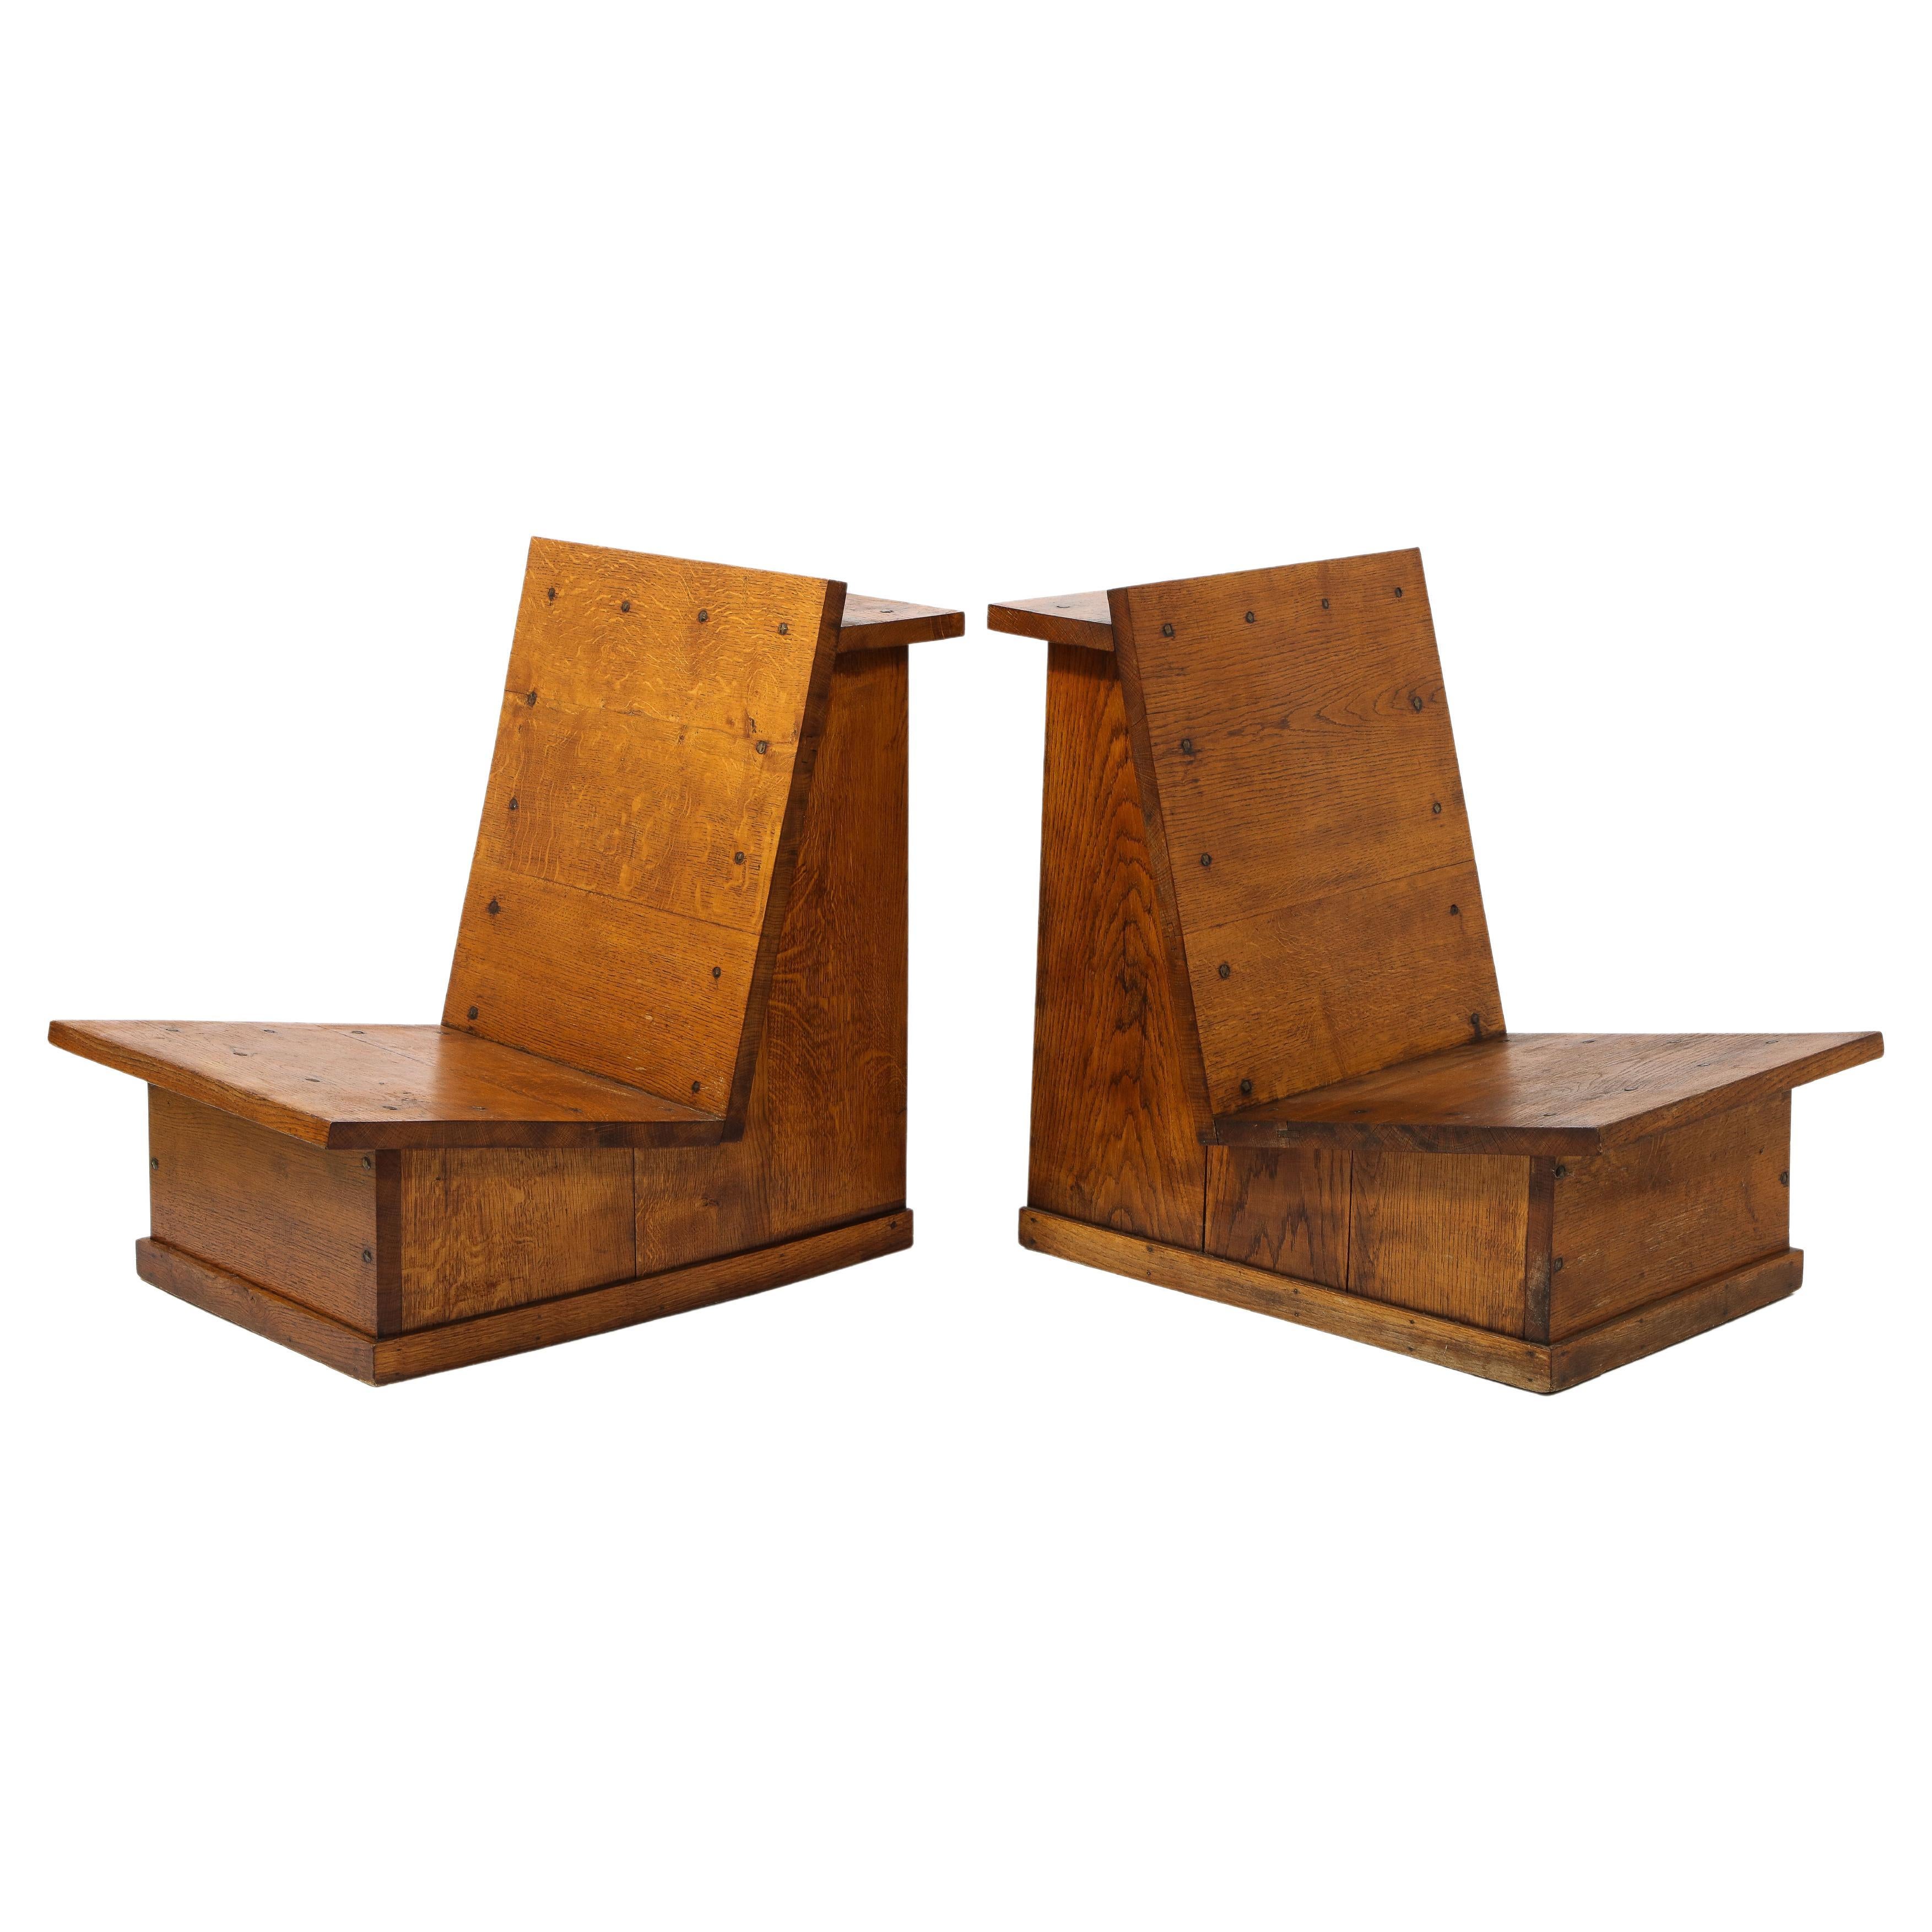 A pair of Brutalist slipper chairs of the Jura region of France, reminiscent of the furniture used in ski resorts by Perriand, these chairs are constructed with solid oak planks and wrought iron nails.